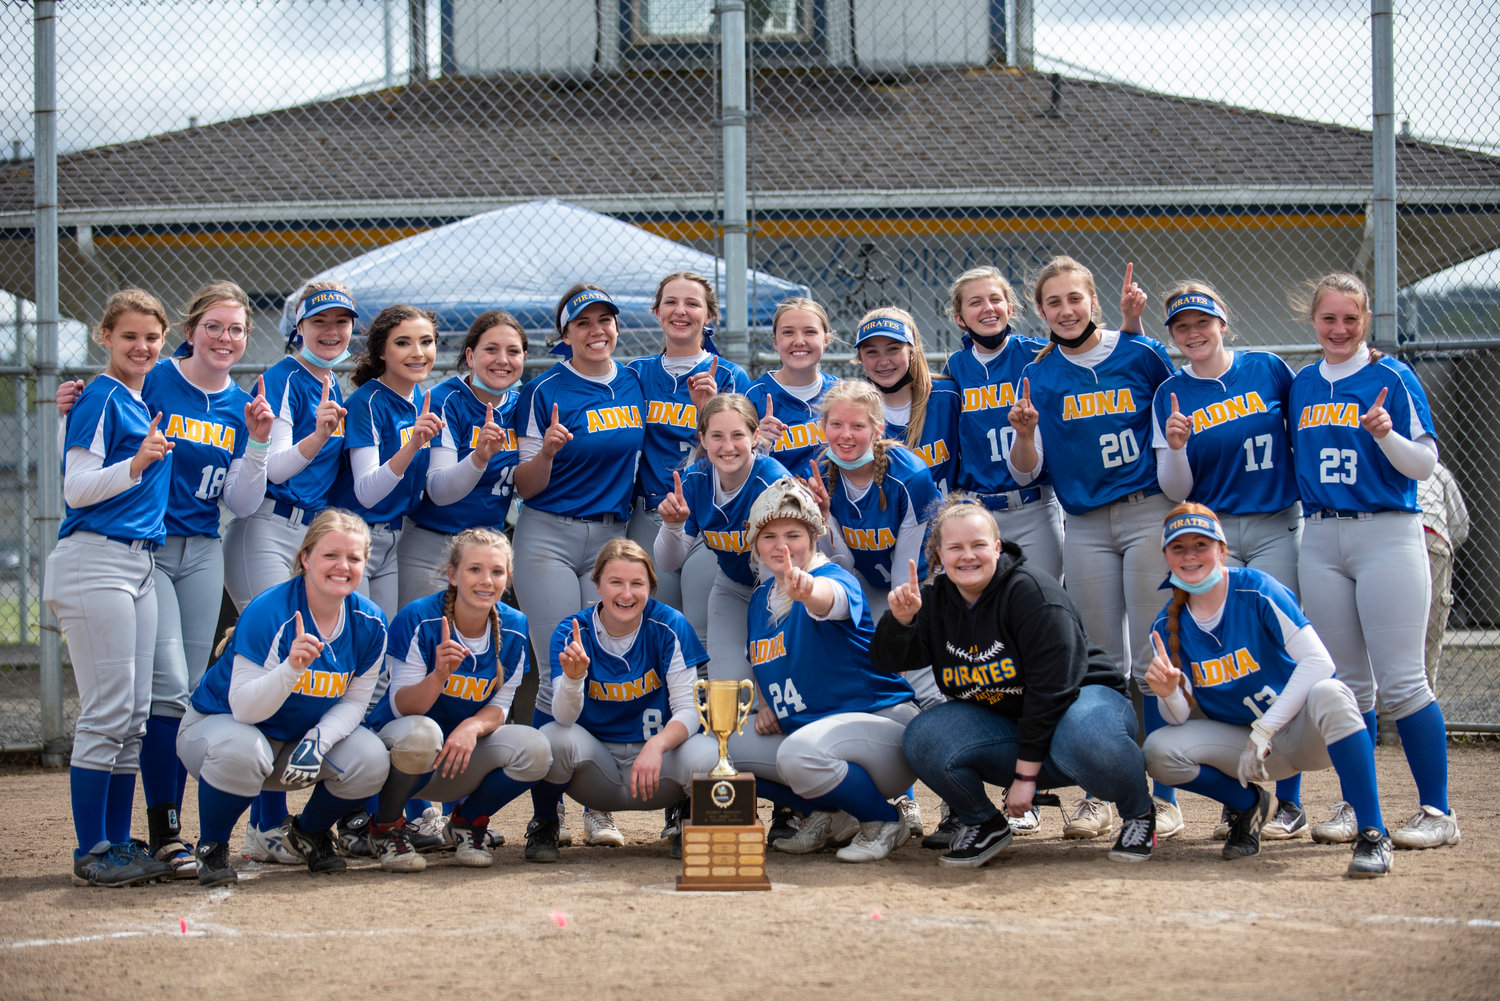 Adna softball poses with the district title trophy after defeating Forks, 4-3, in the championship game on Saturday, May 1, 2021.